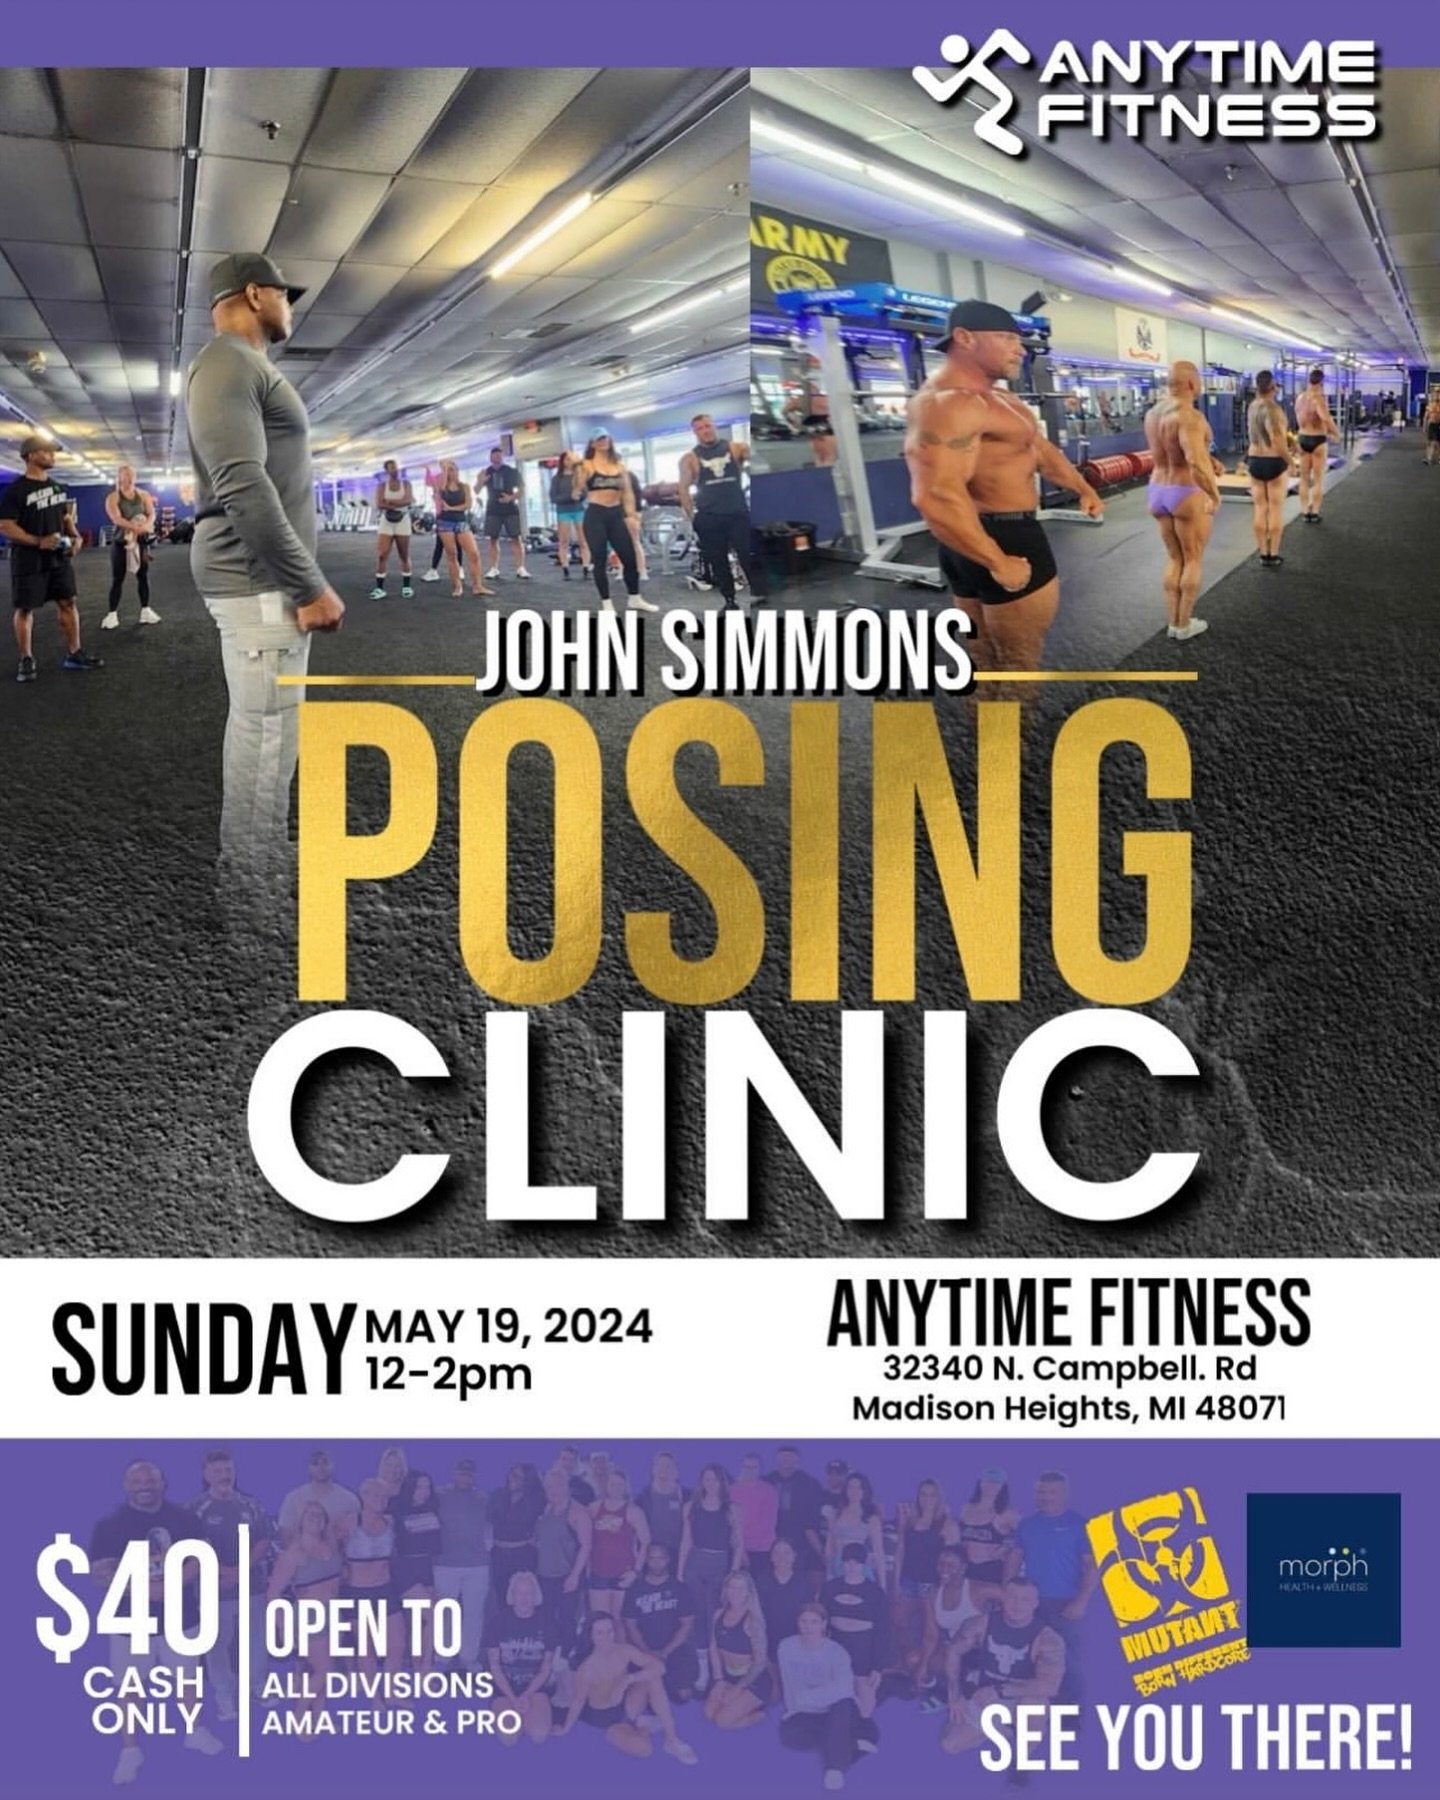 Join me and 4x Ms. Olympia @mzprettymuscle at our John Simmons Posing Clinic on May 19 Sunday at 12-2pm at Anytime Fitness Madison Heights!!! 🥇

@johnsimmonsifbb 
@johnsimmons654 
@kellibrumbaugh7822 
@anytimefitness_mh
@mutantnation